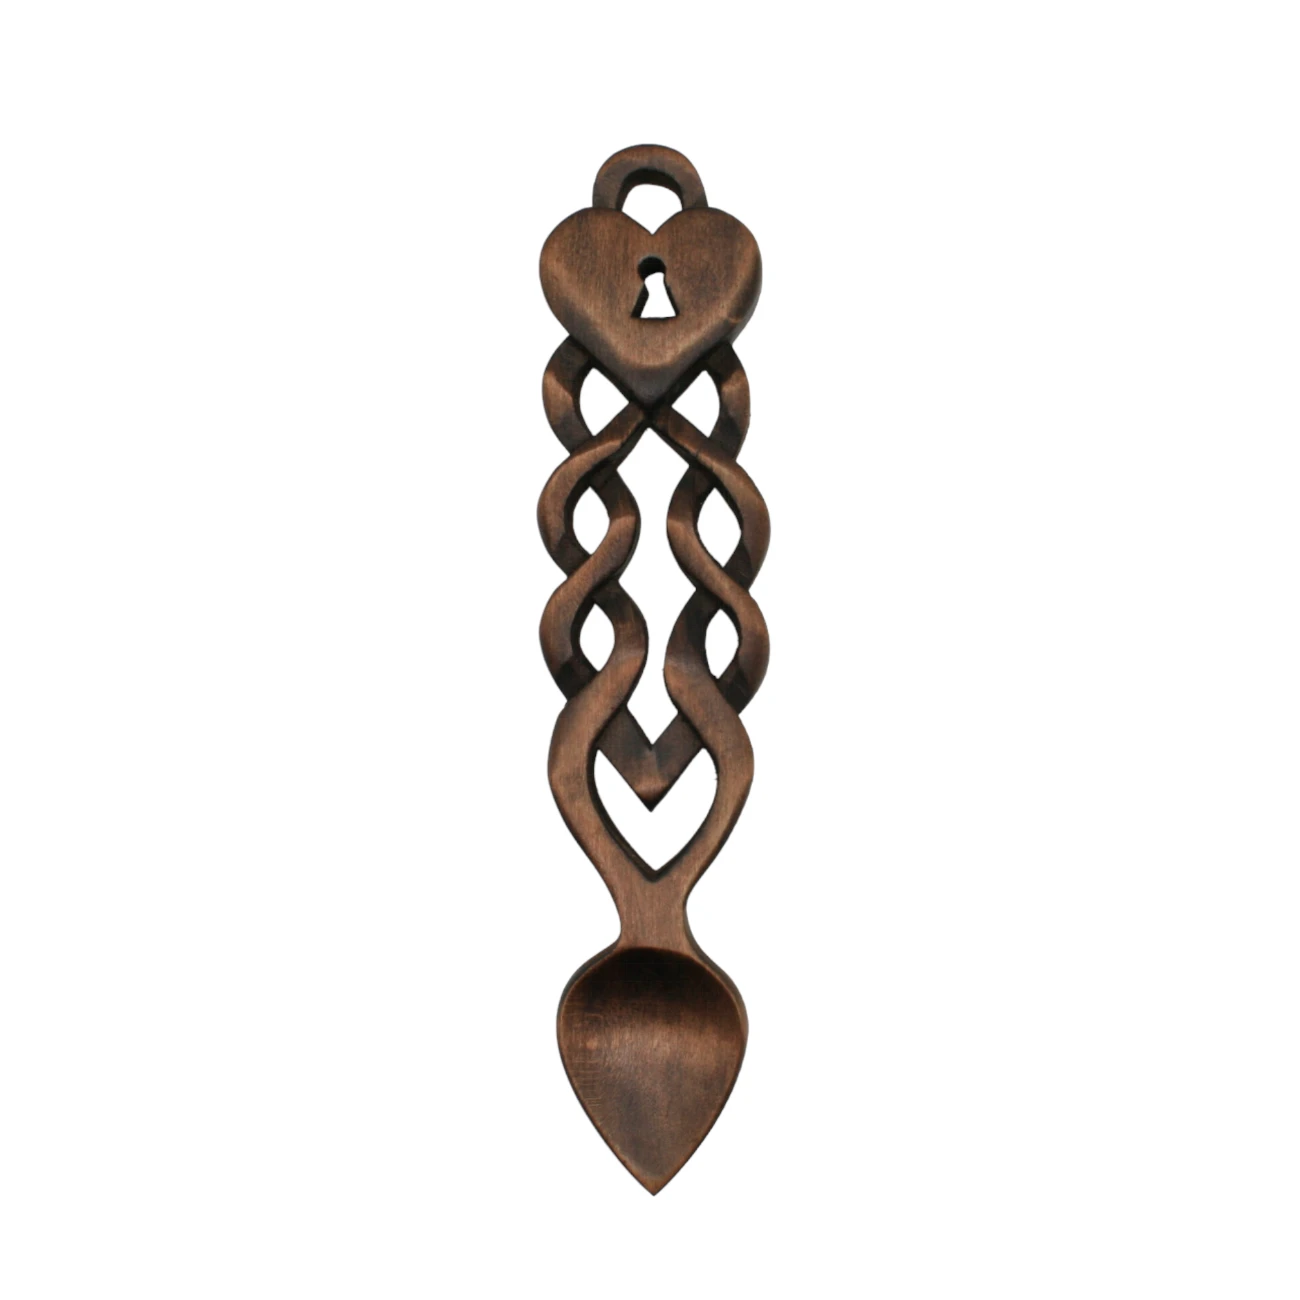 An image of a lovespoon titled Heart, Lock & Knot